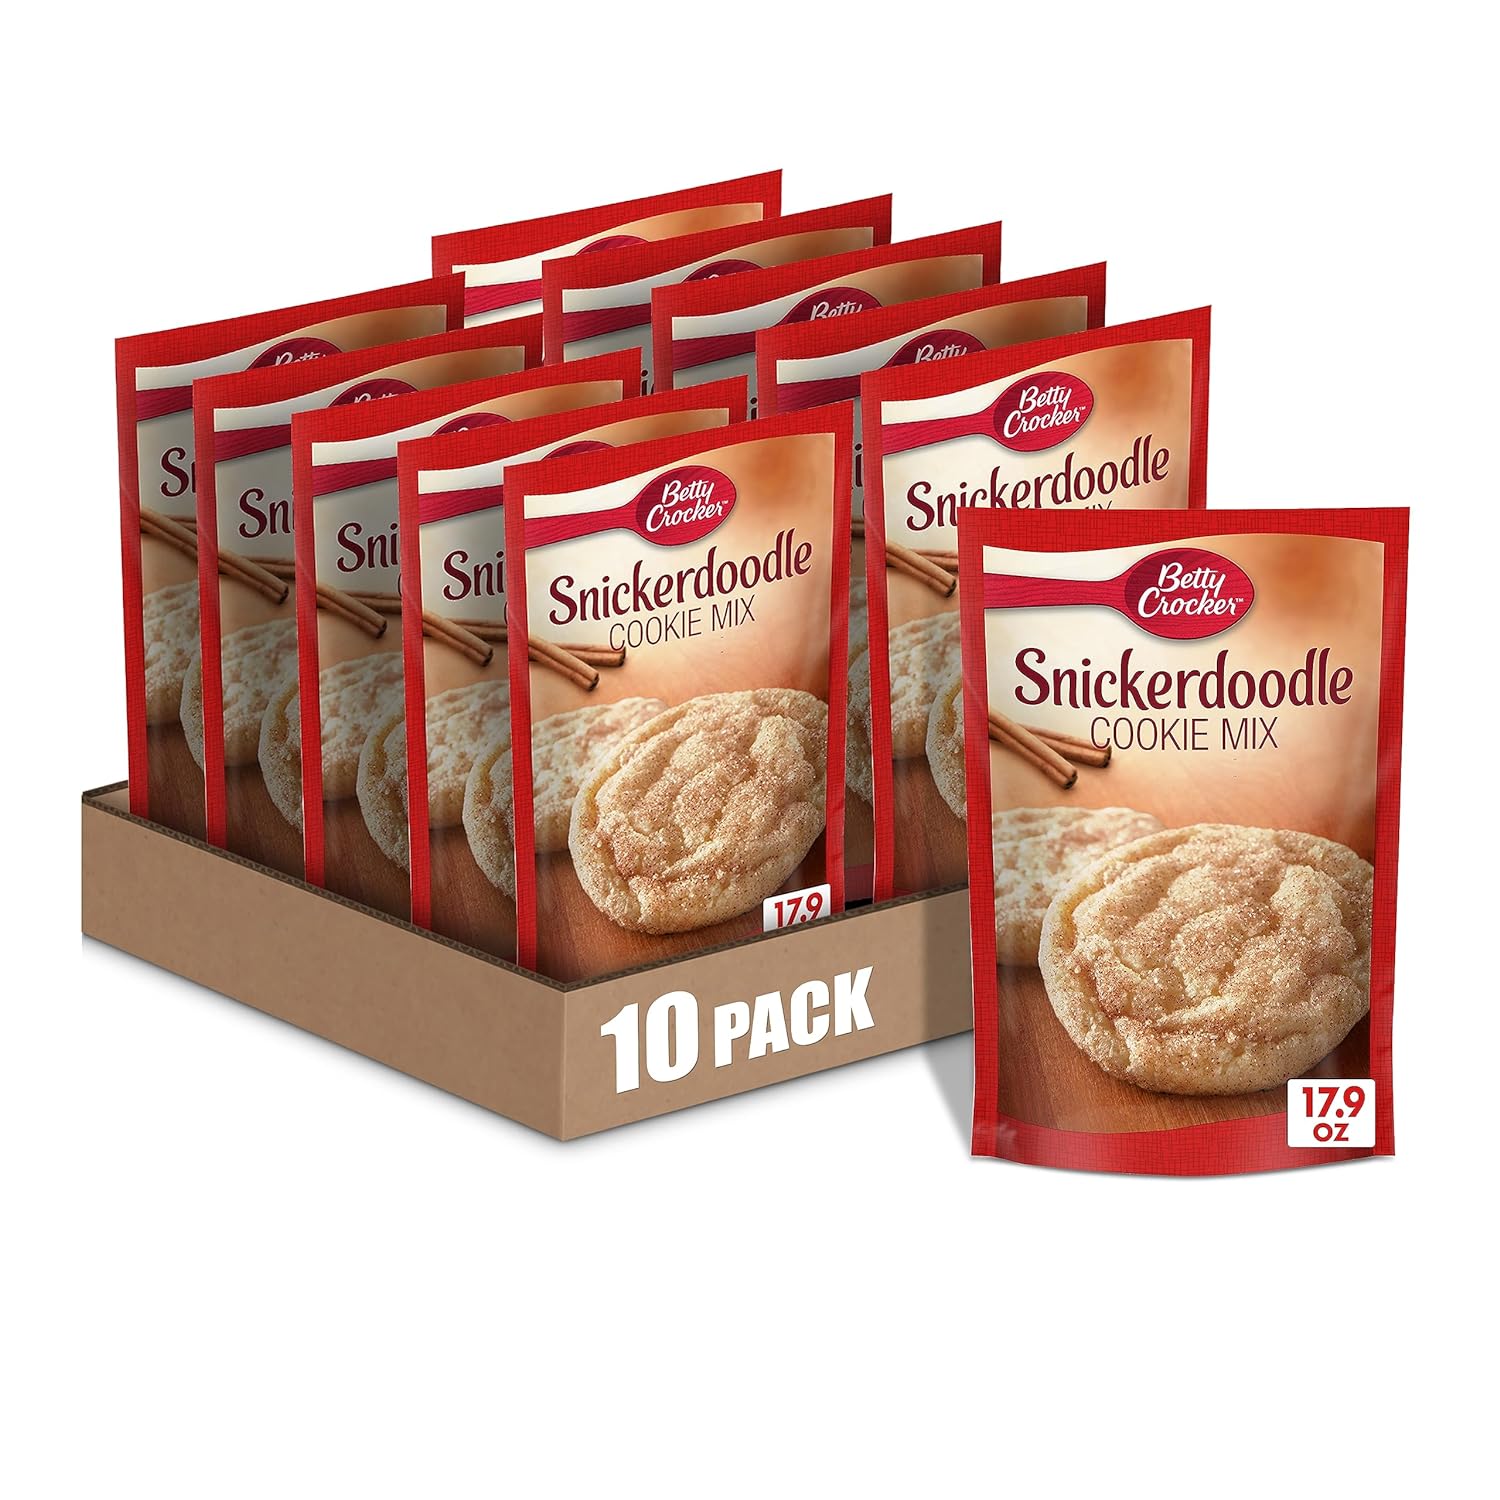 Betty Crocker Snickerdoodle Cookie Mix, 17.9 oz. (Pack of 10)